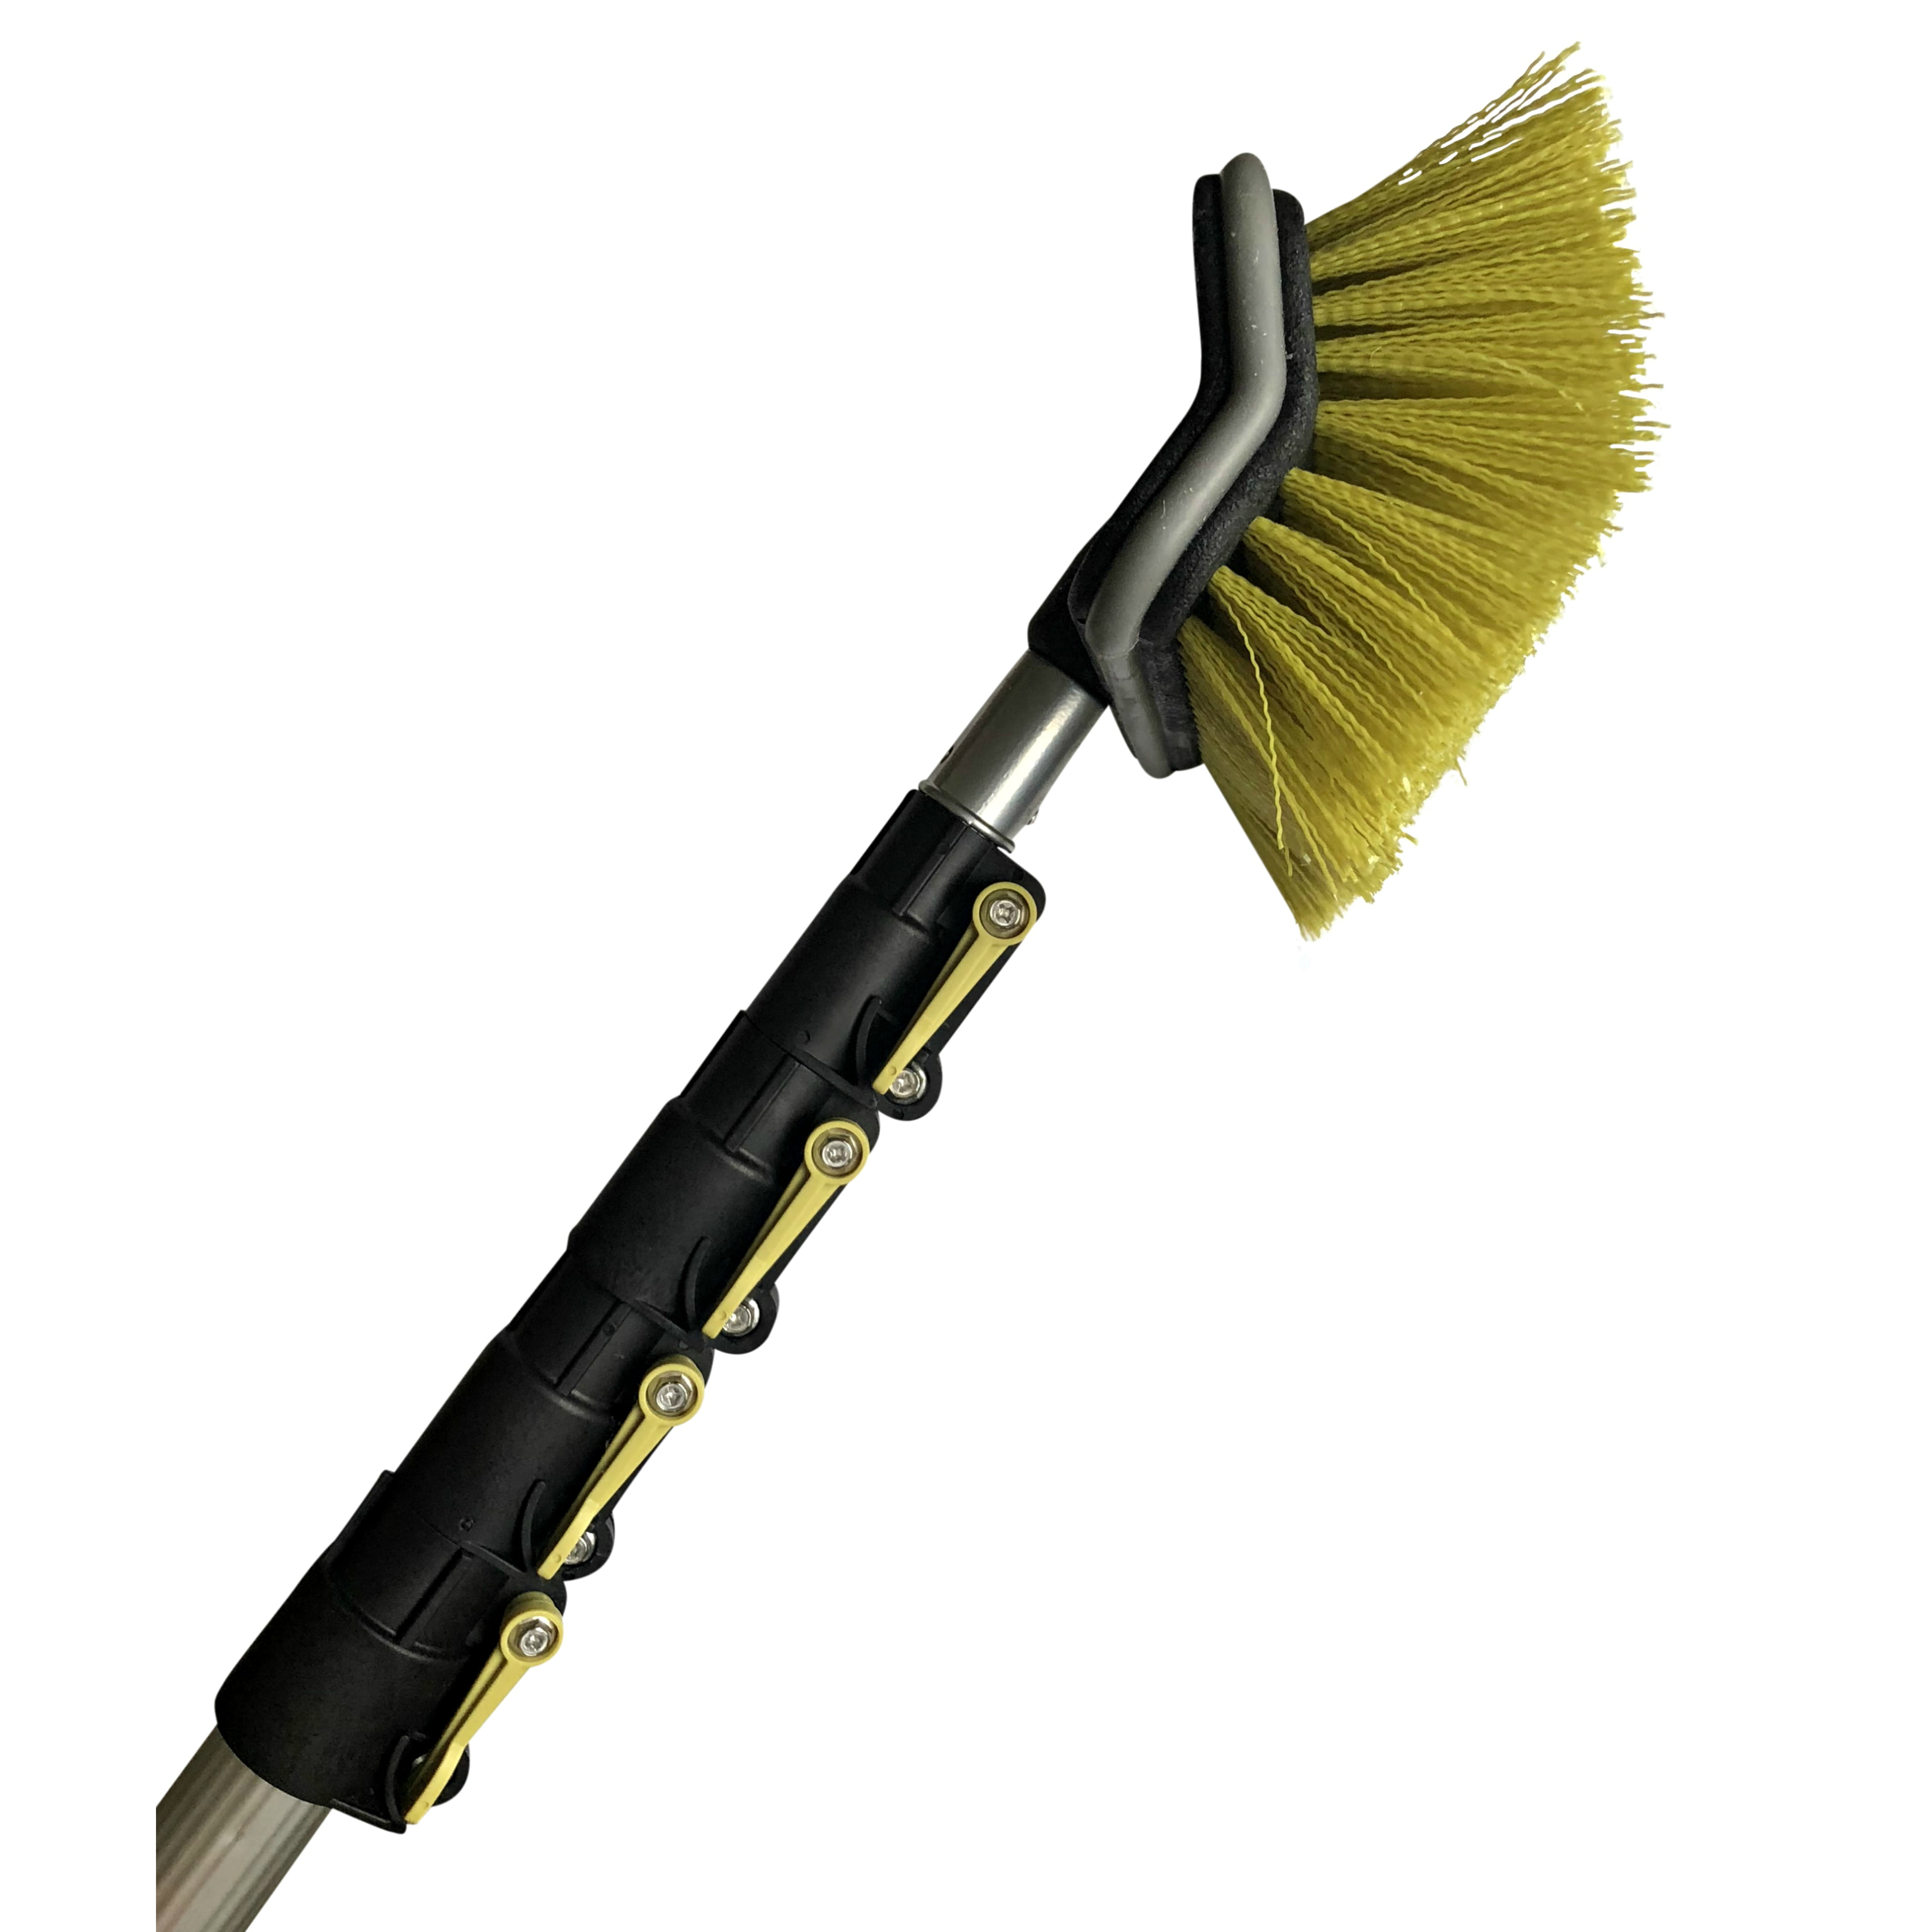 Telescoping Brush For Cleaning Siding